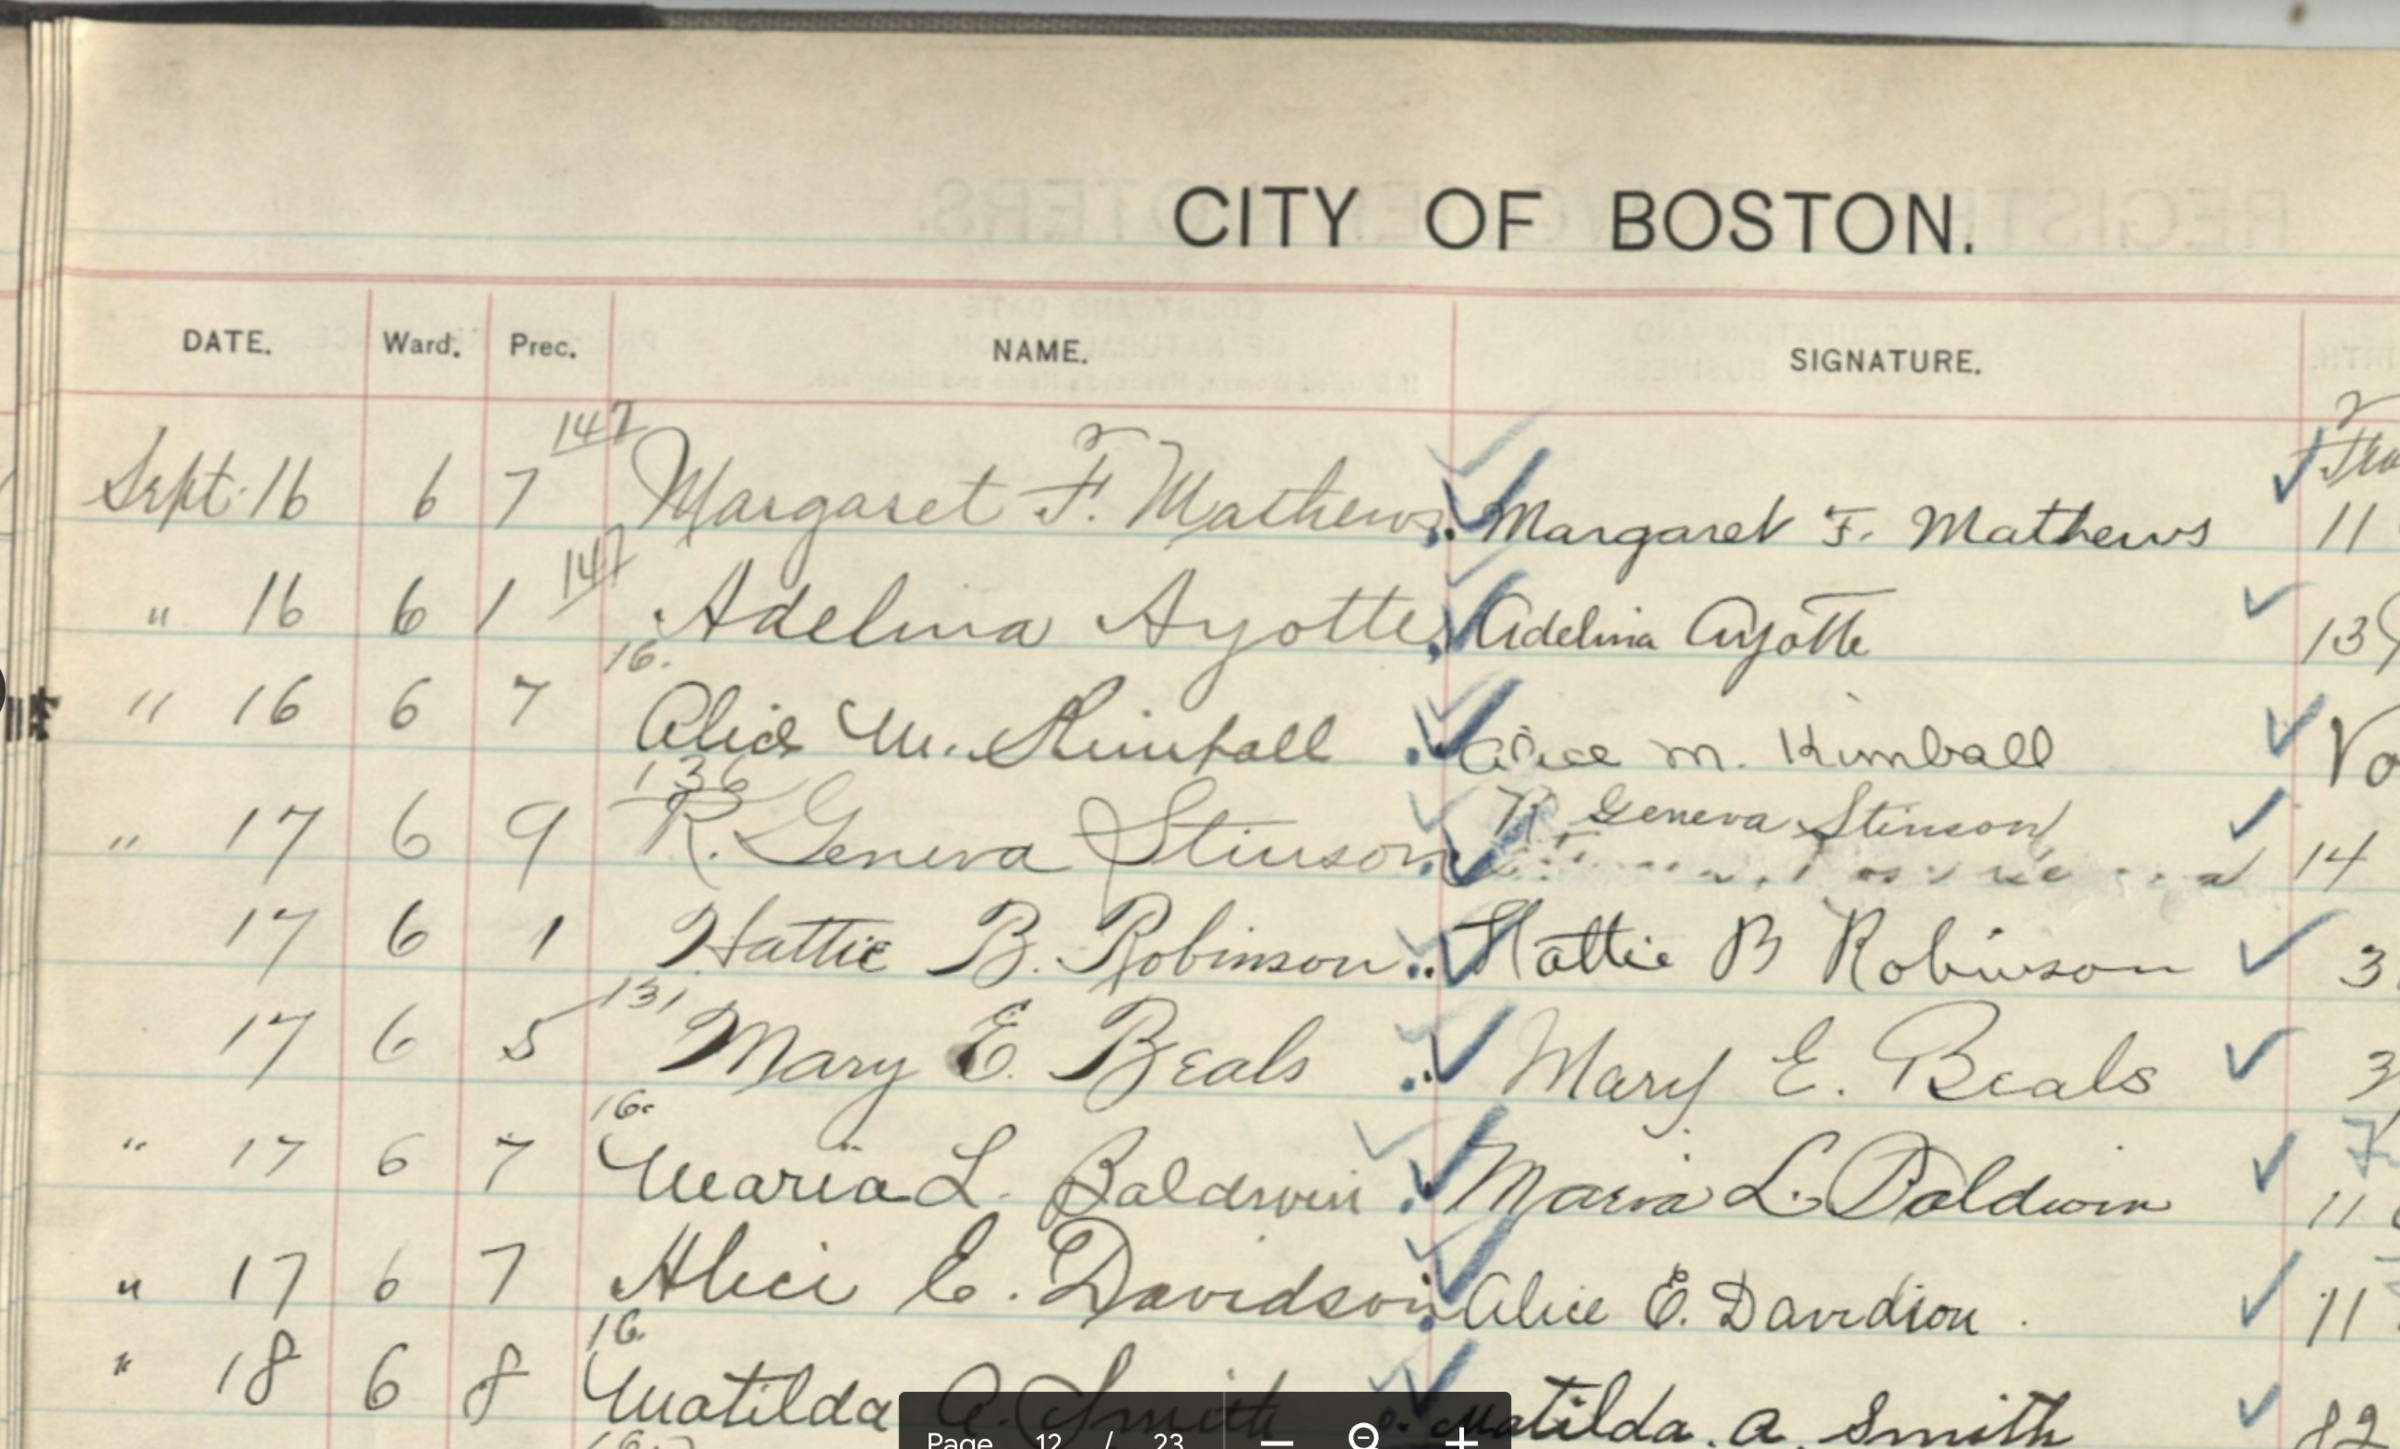 Maria L. Baldwin’s entry is second from the bottom in this voter registration book.